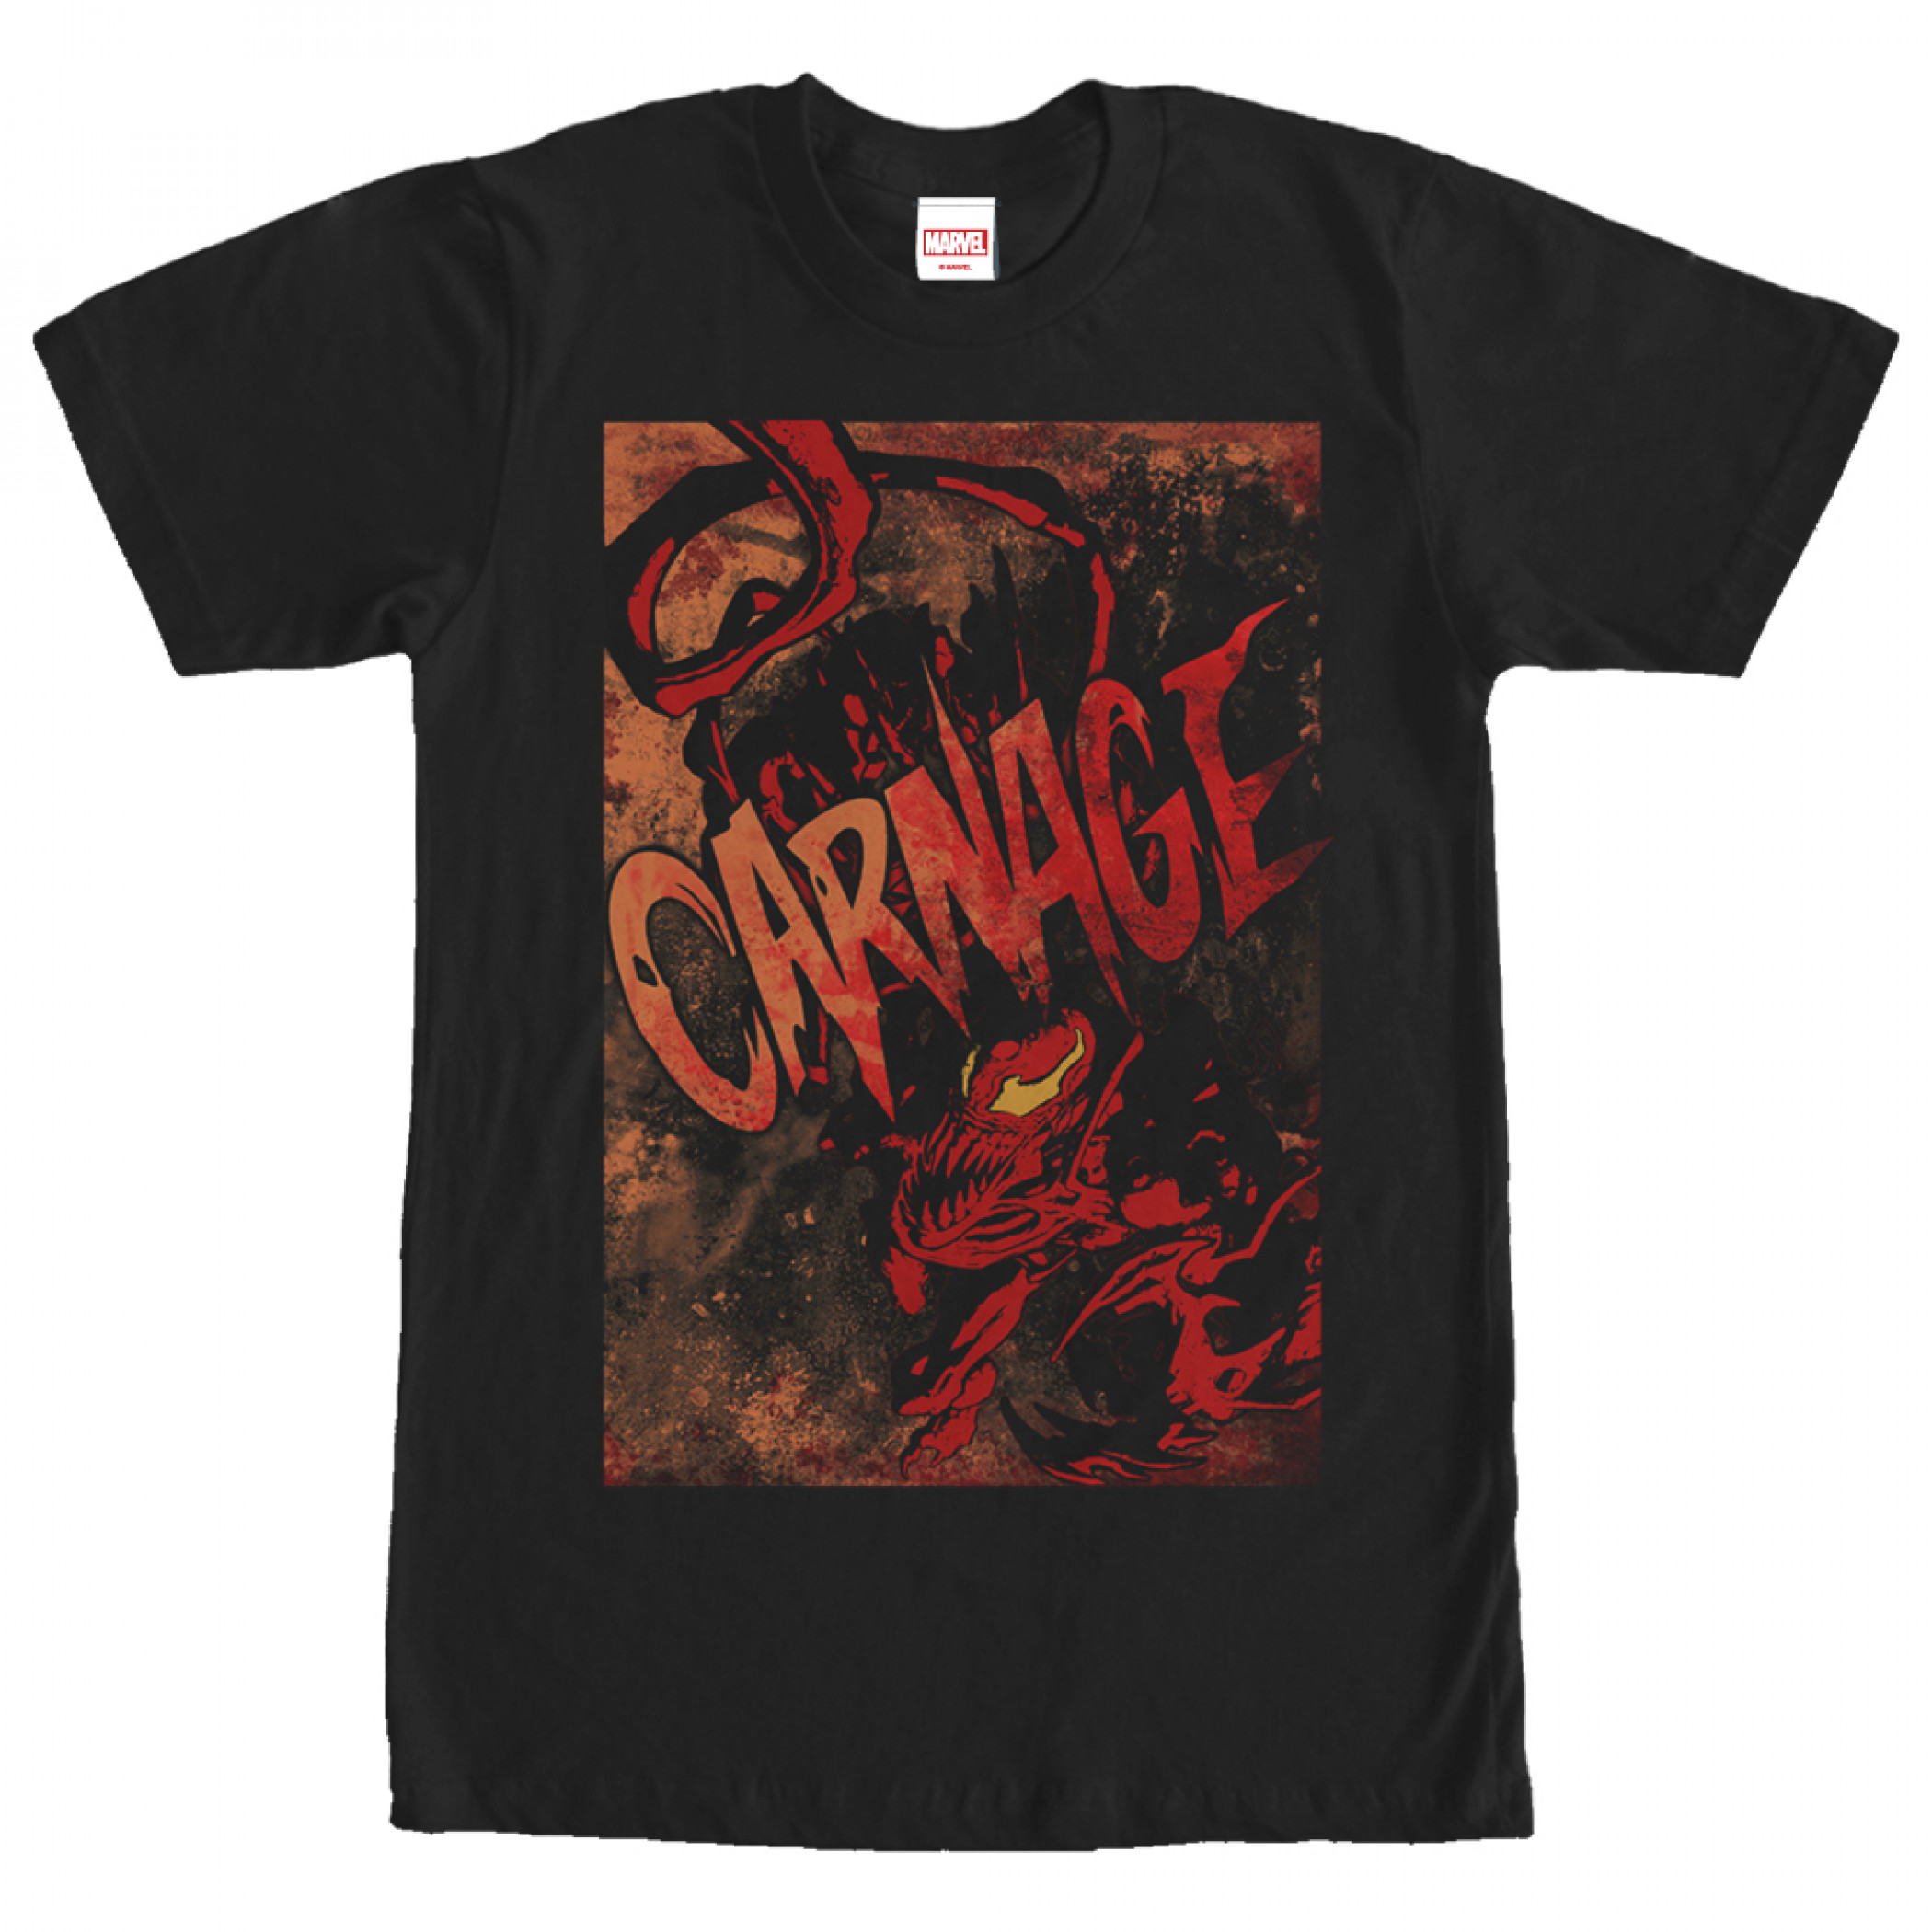 Ultimate Carnage Spreading T-Shirt